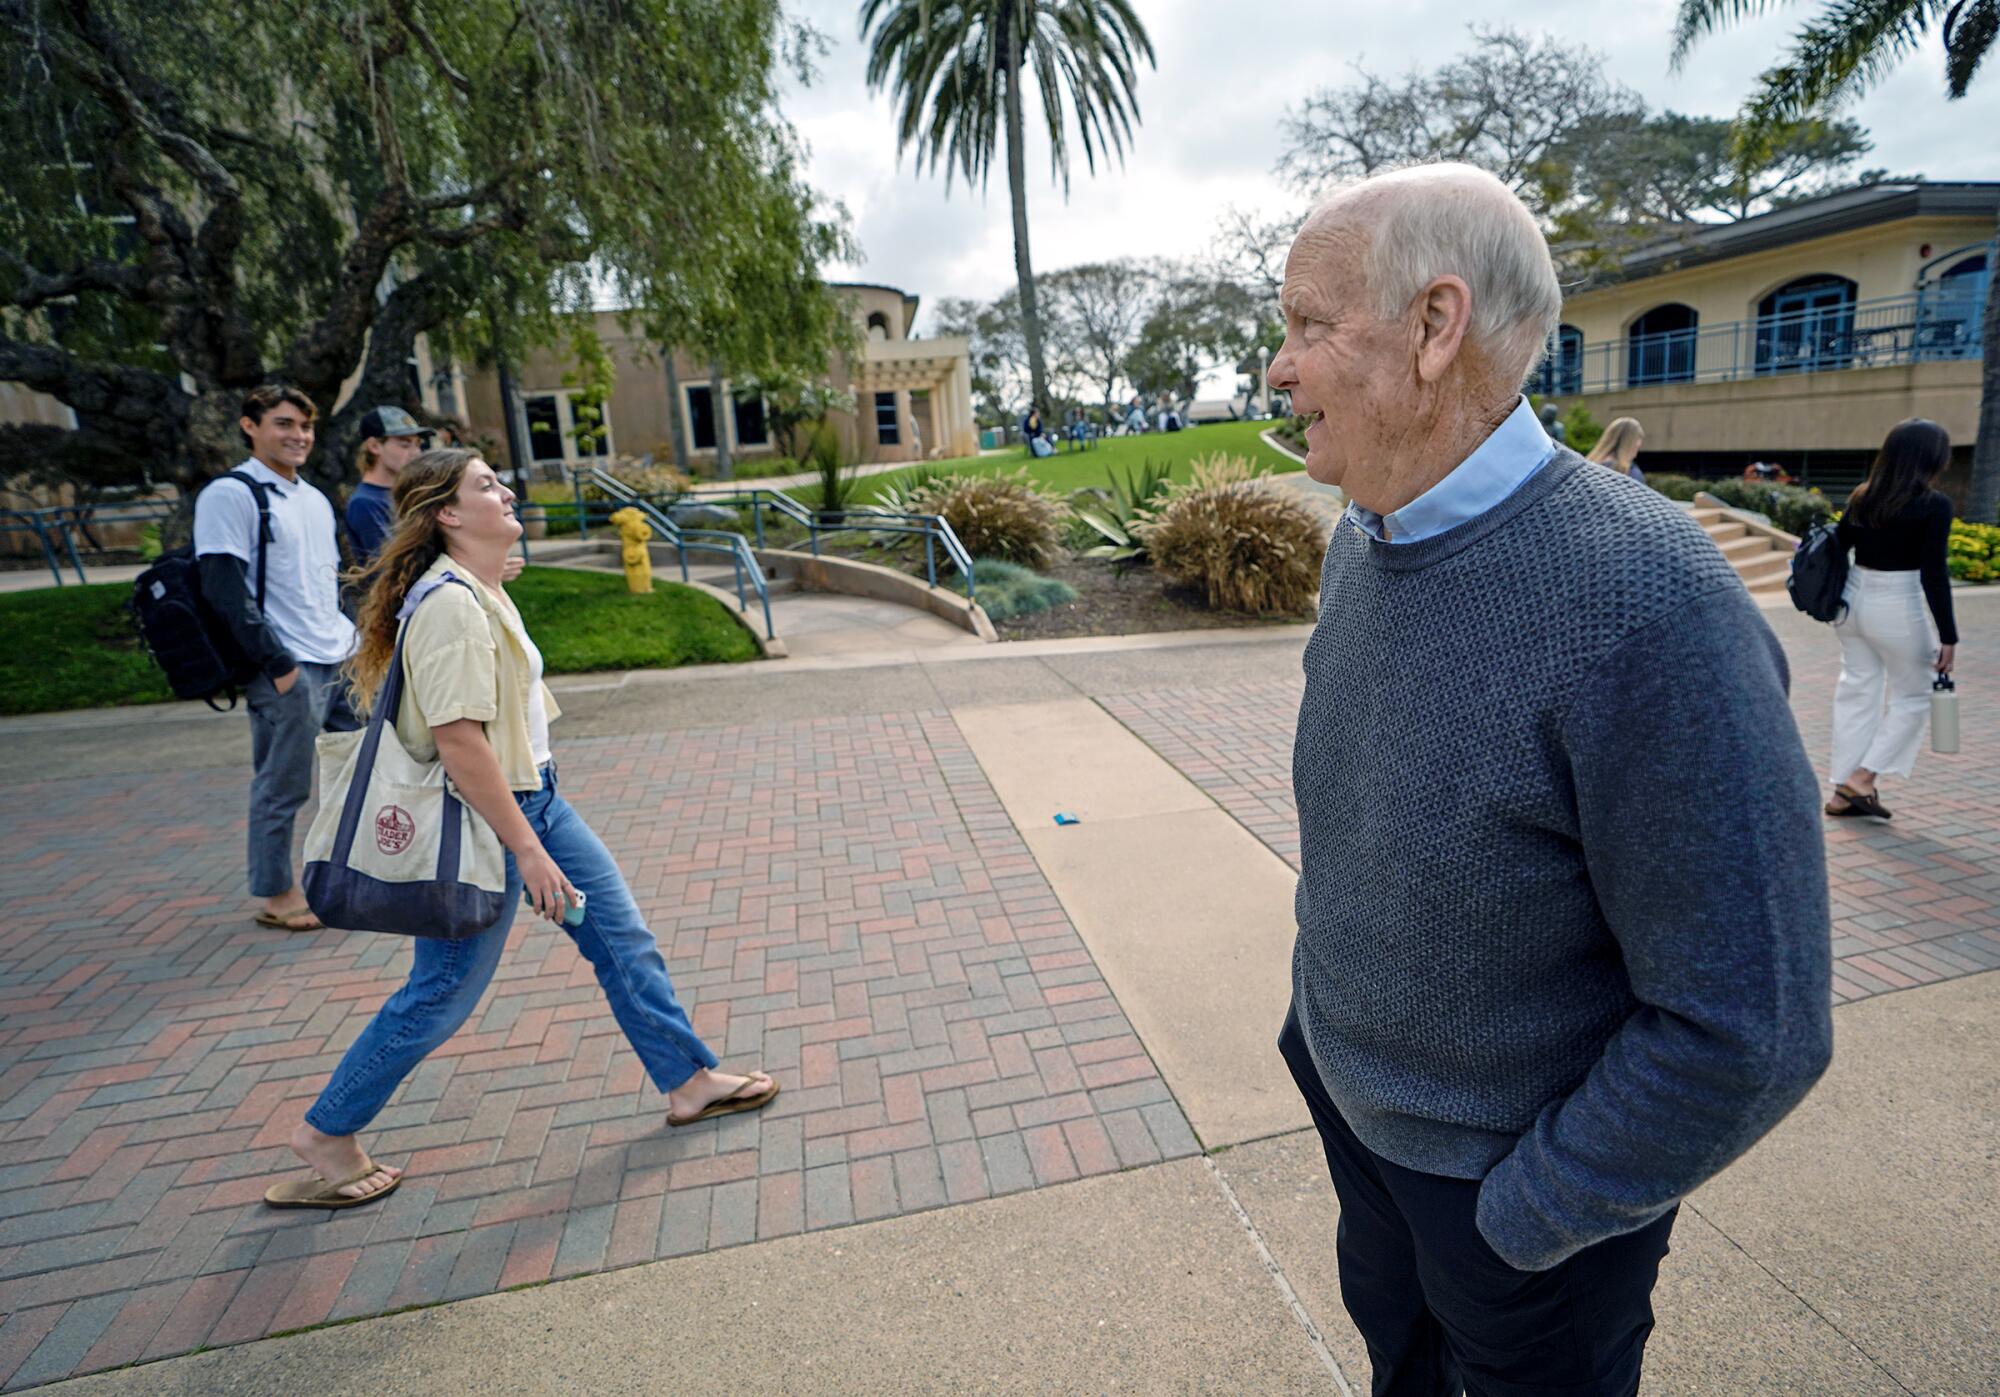 Bob Brower, president of PLNU, greets students near a campus coffee shop that carries his name.